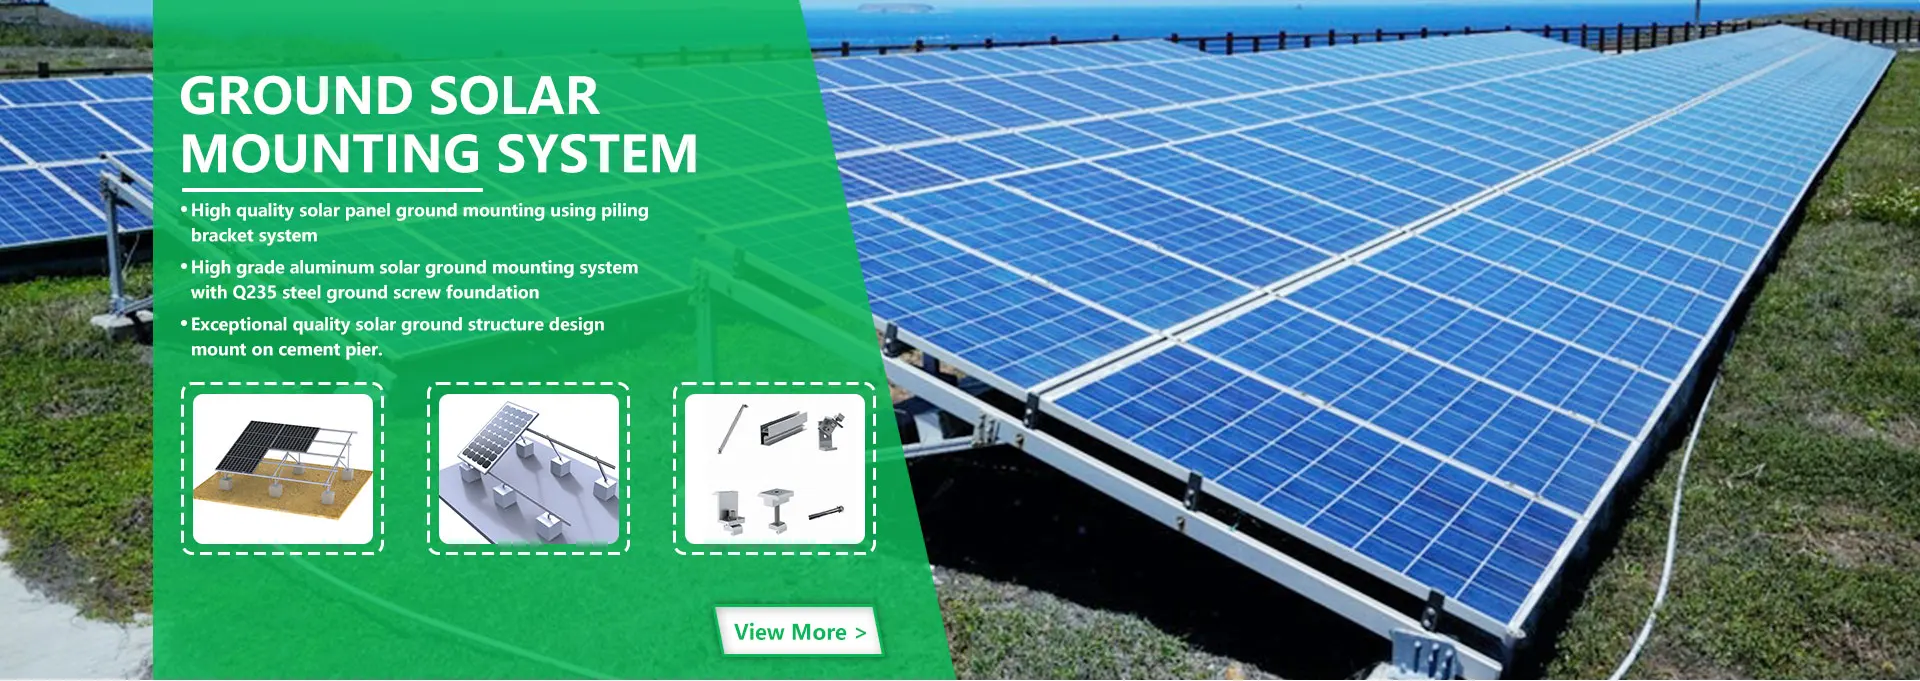 Aluminum Solar Grounding Mounting Systems -  N  type, Concrete Pier